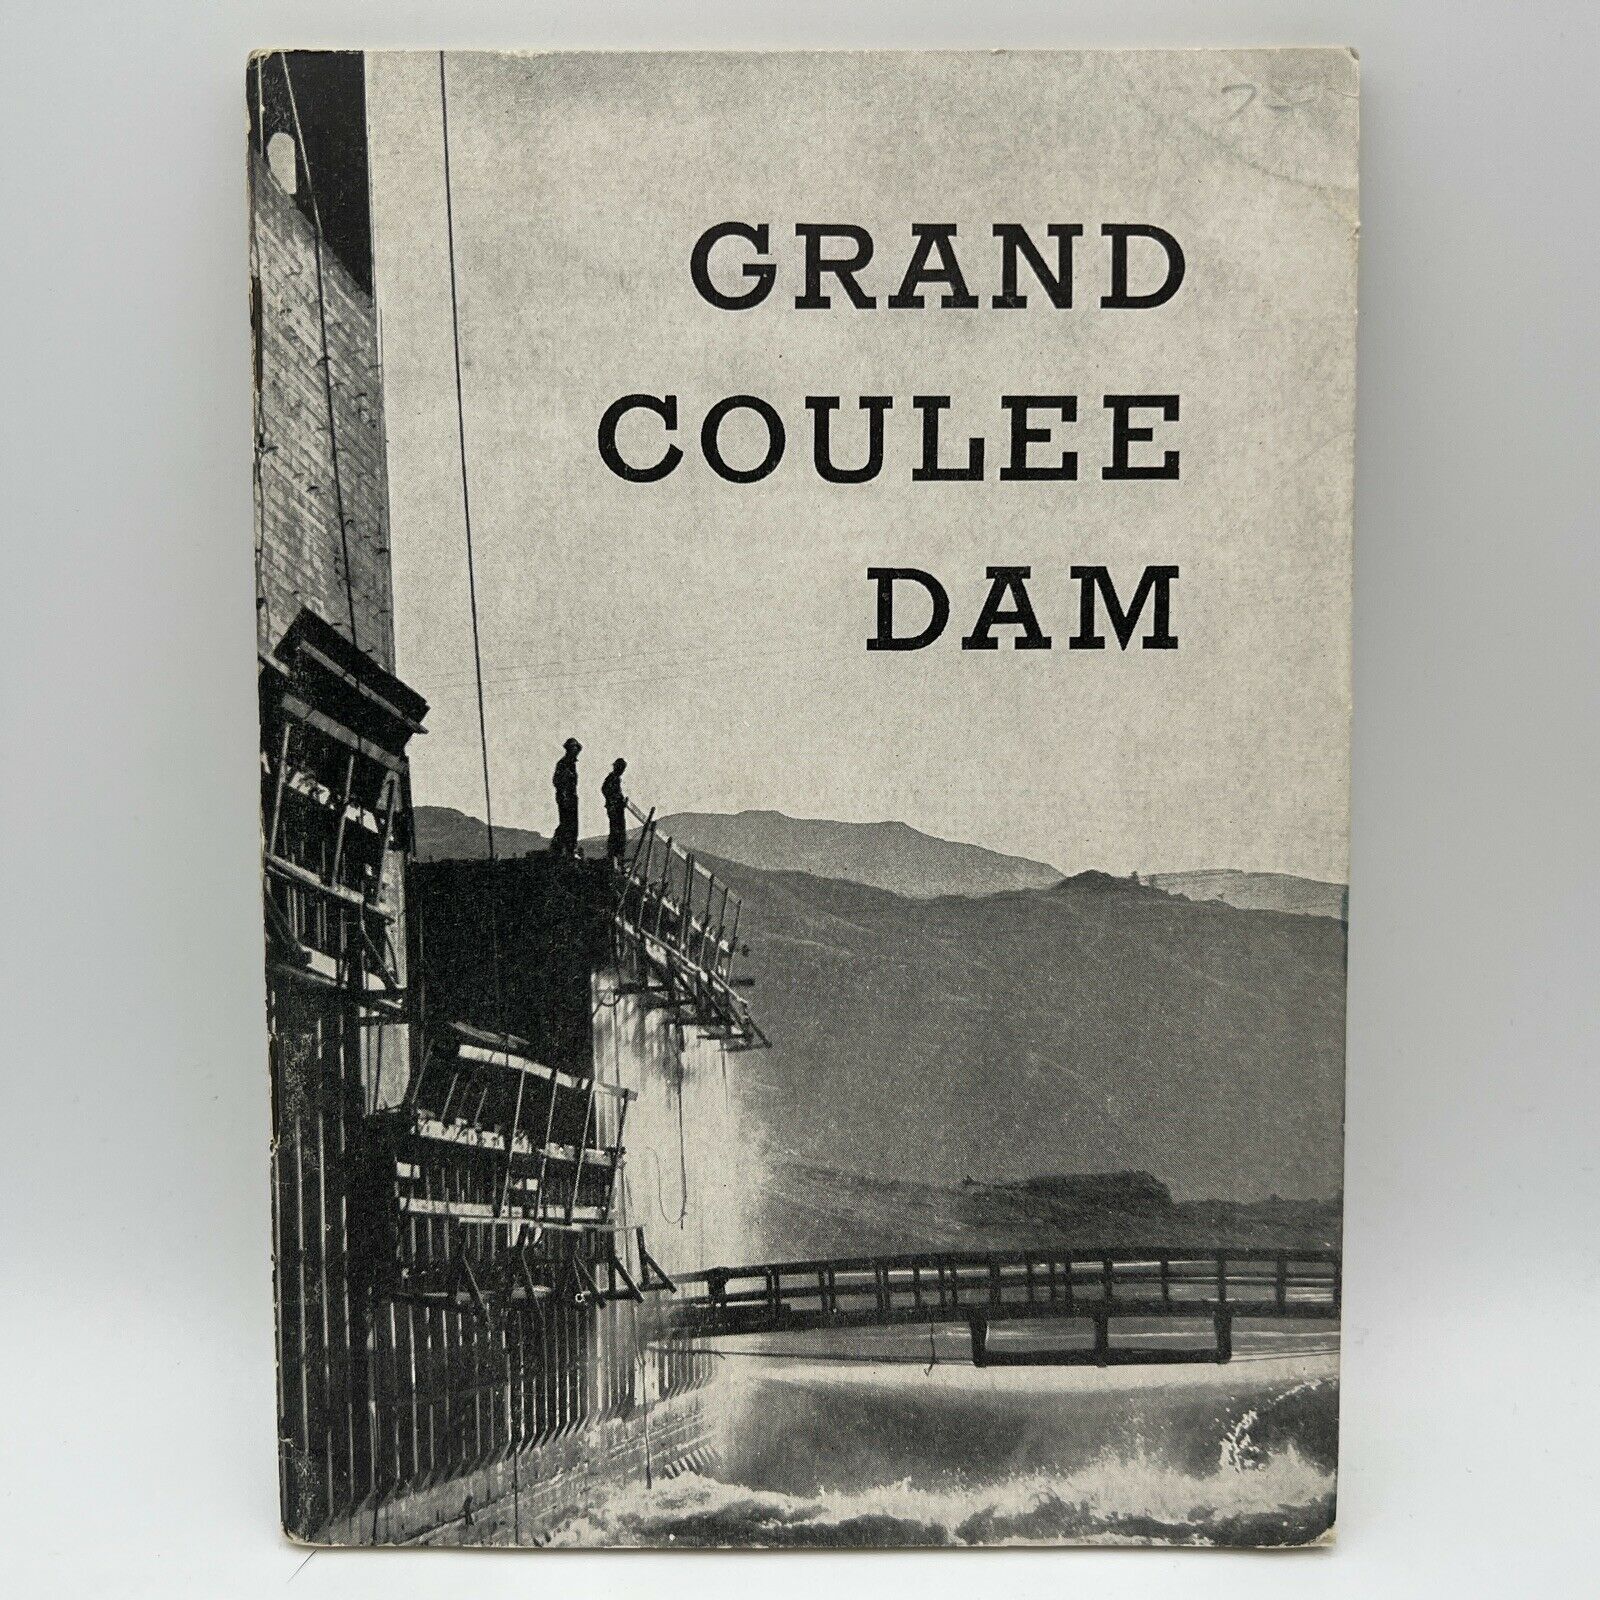 1937 GRAND COULEE DAM Columbia Basin Reclamation Project TRAVEL GUIDE BOOKLET